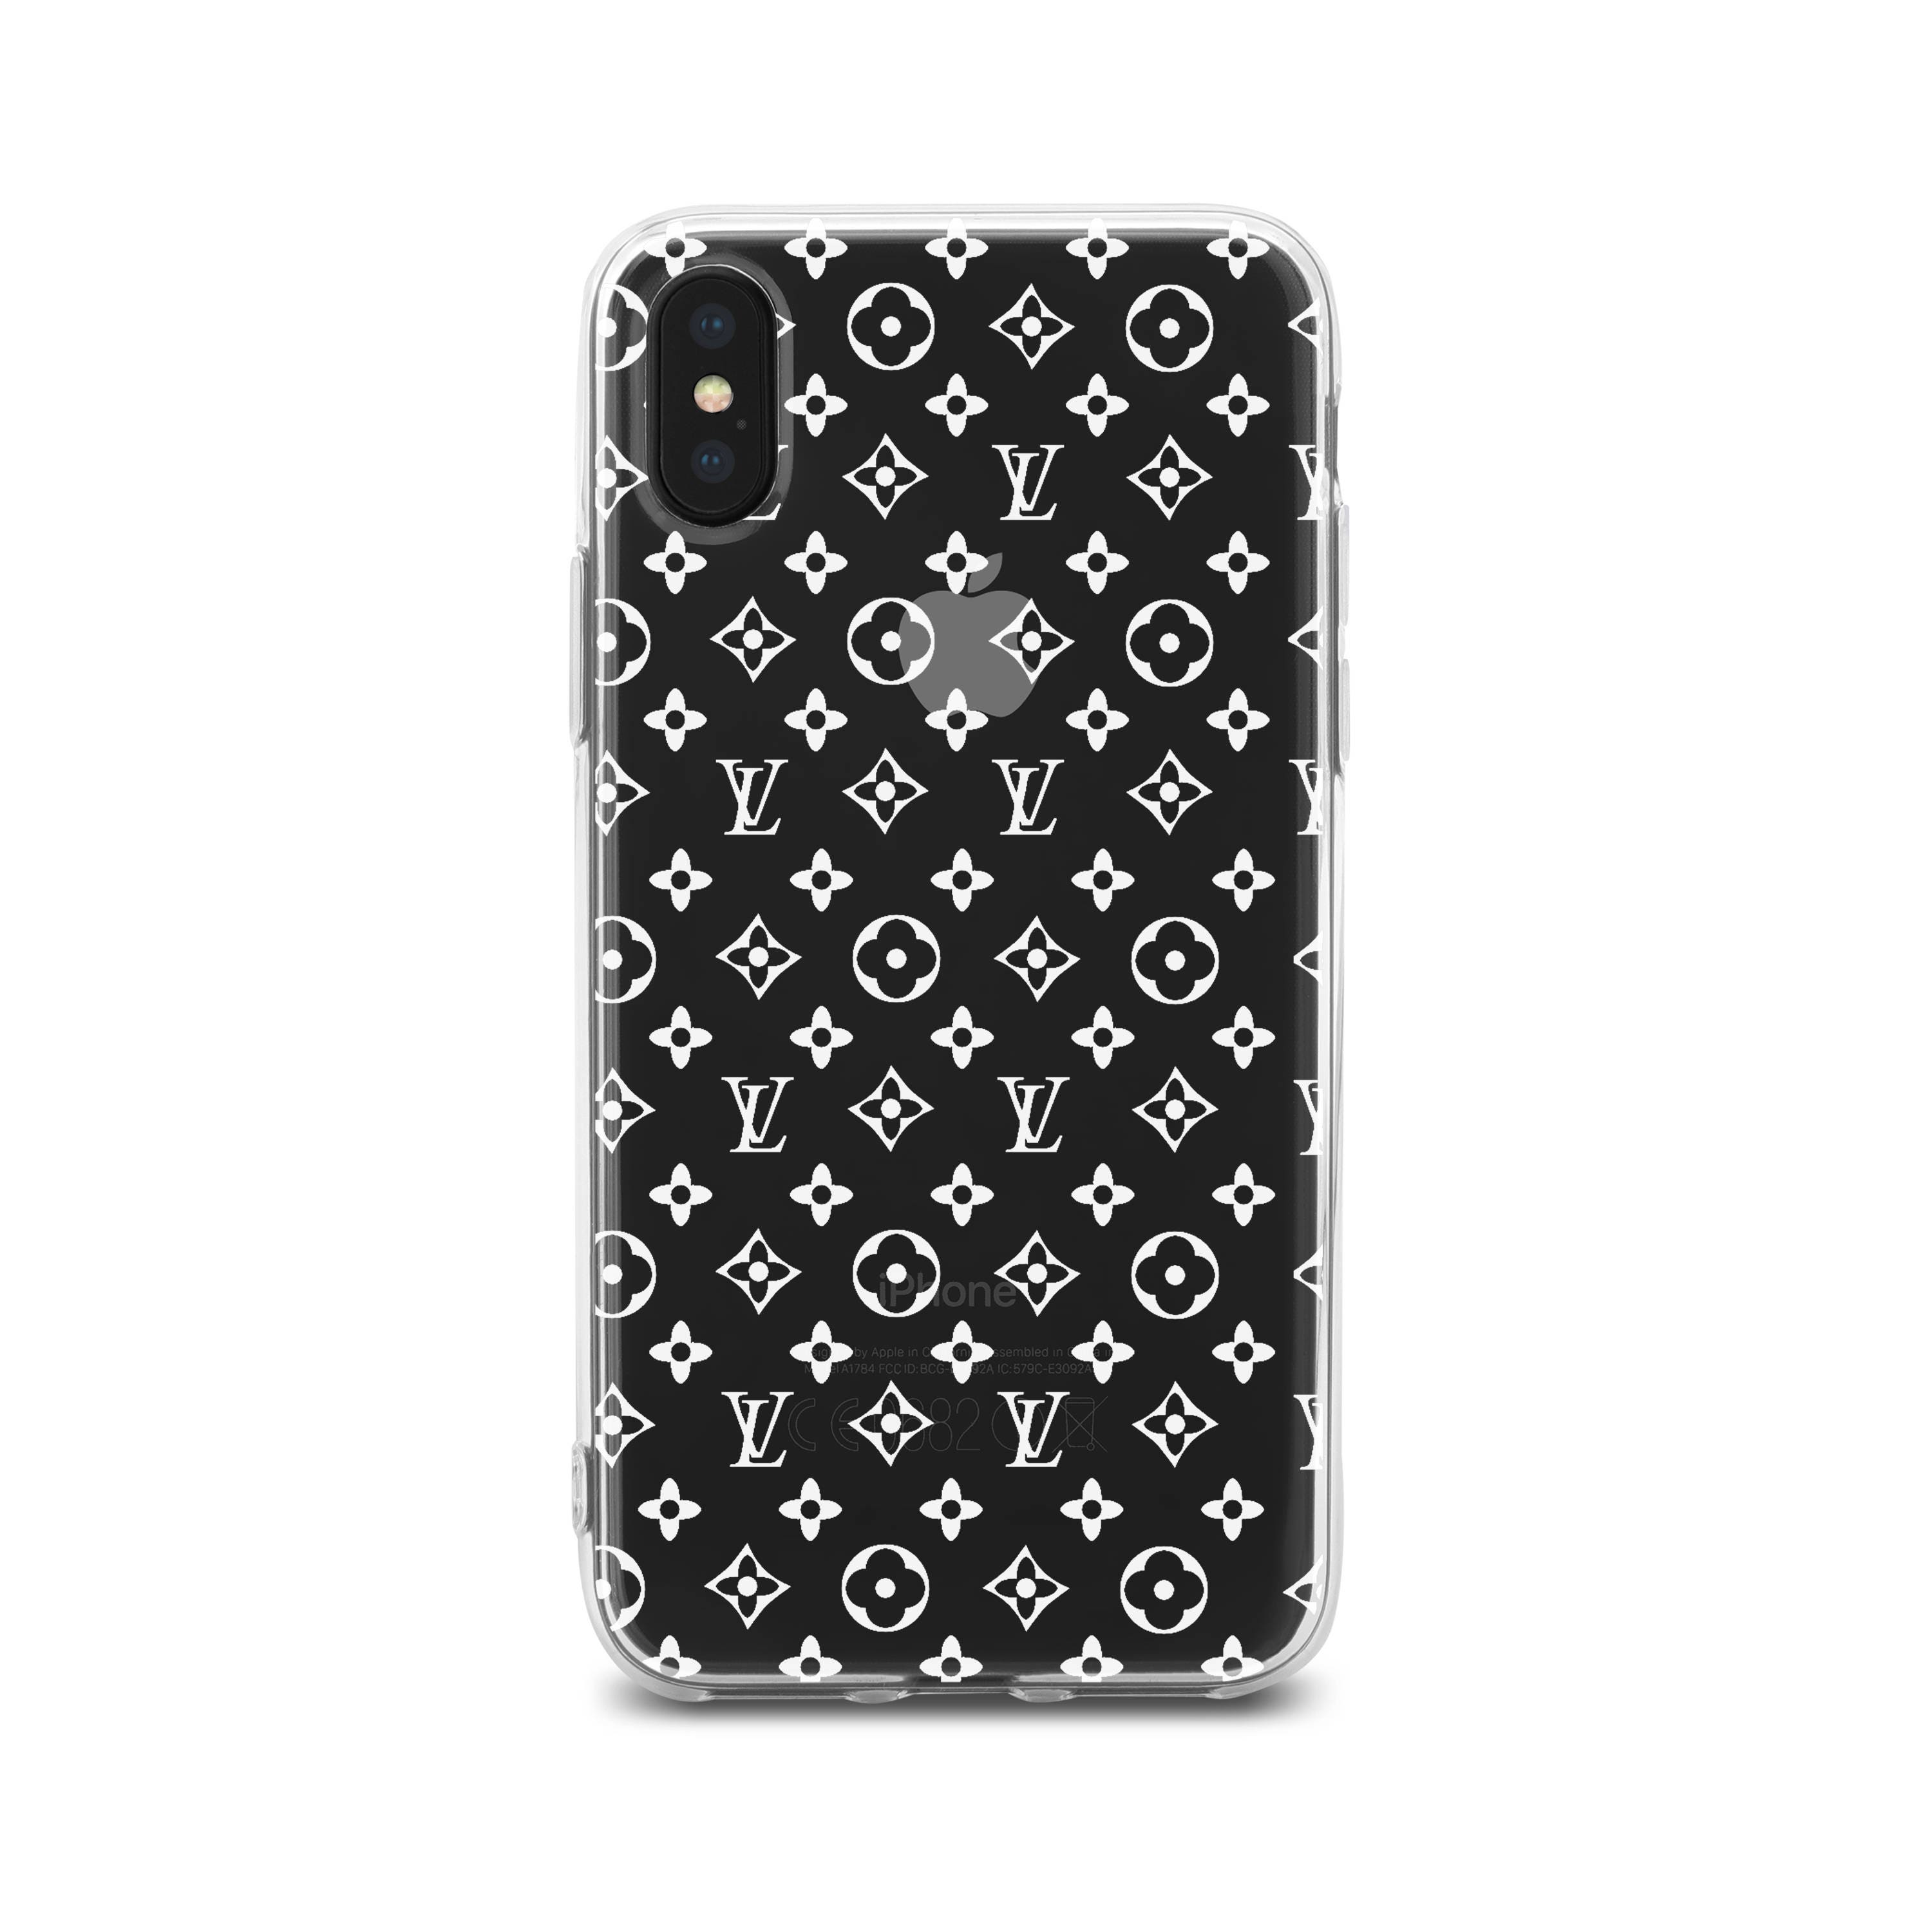 Louis Vuitton Iphone 8 Covers | Confederated Tribes of the Umatilla Indian Reservation